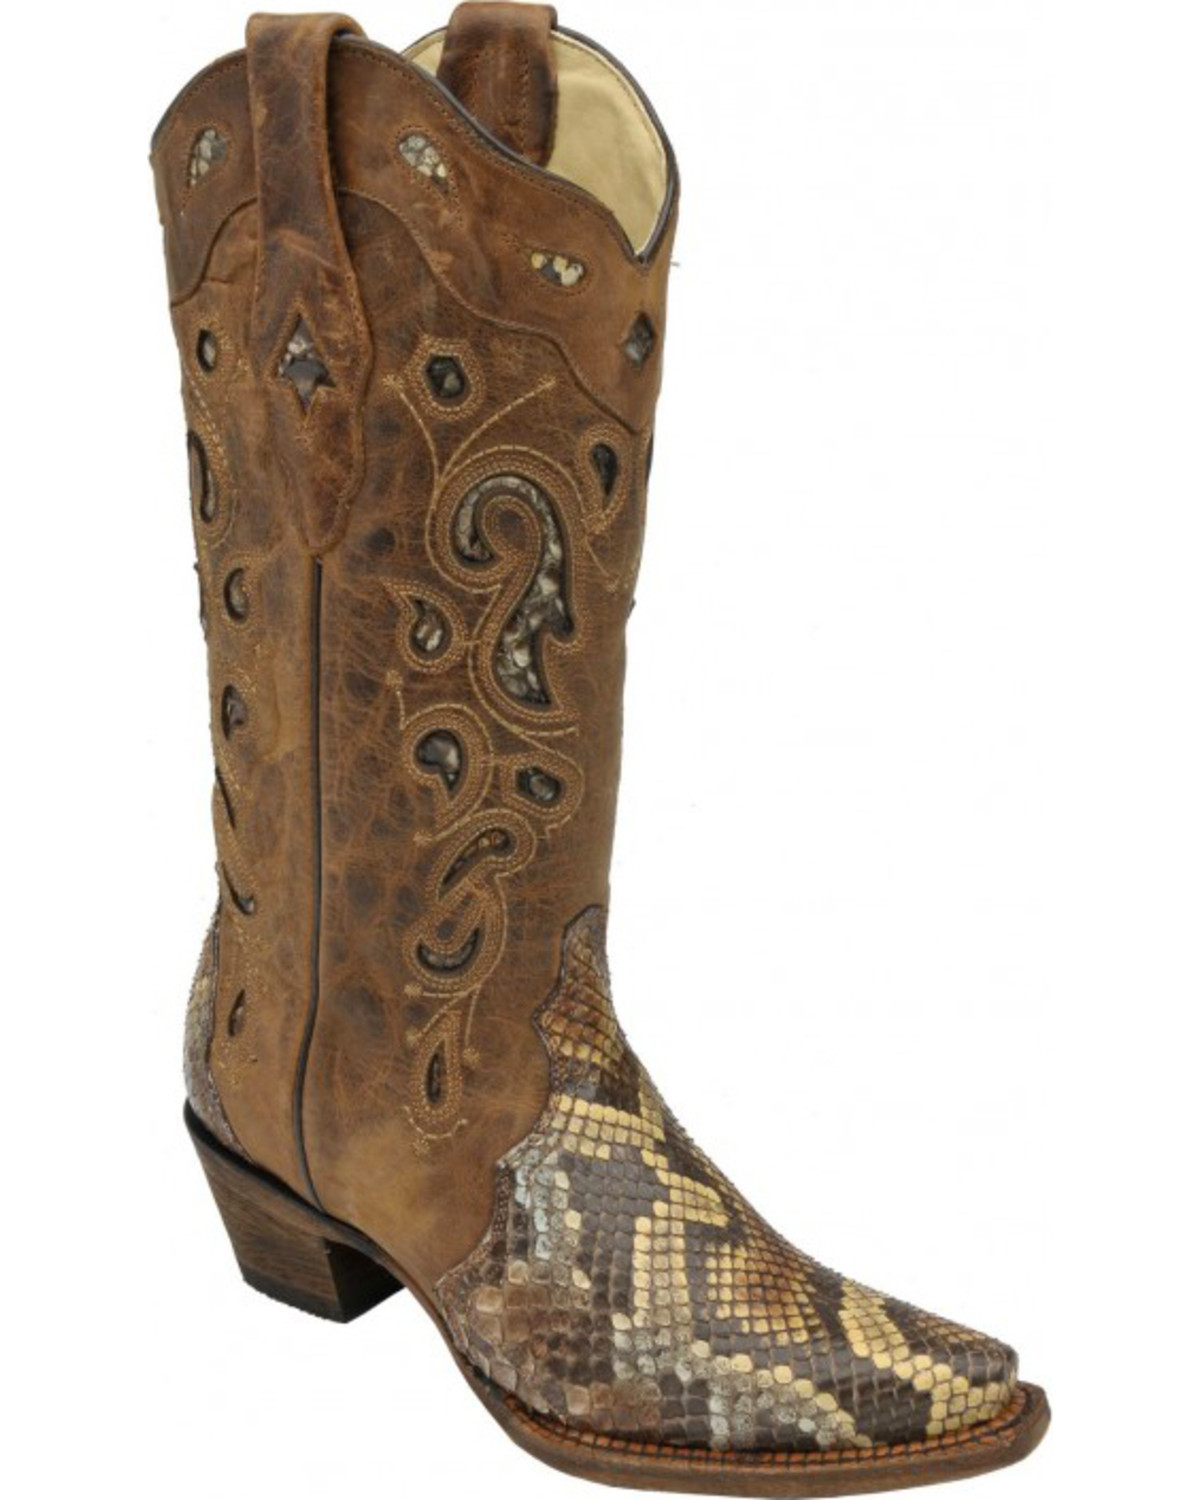 Corral Python Inlay Cowgirl Boots - Snip Toe - Country Outfitter